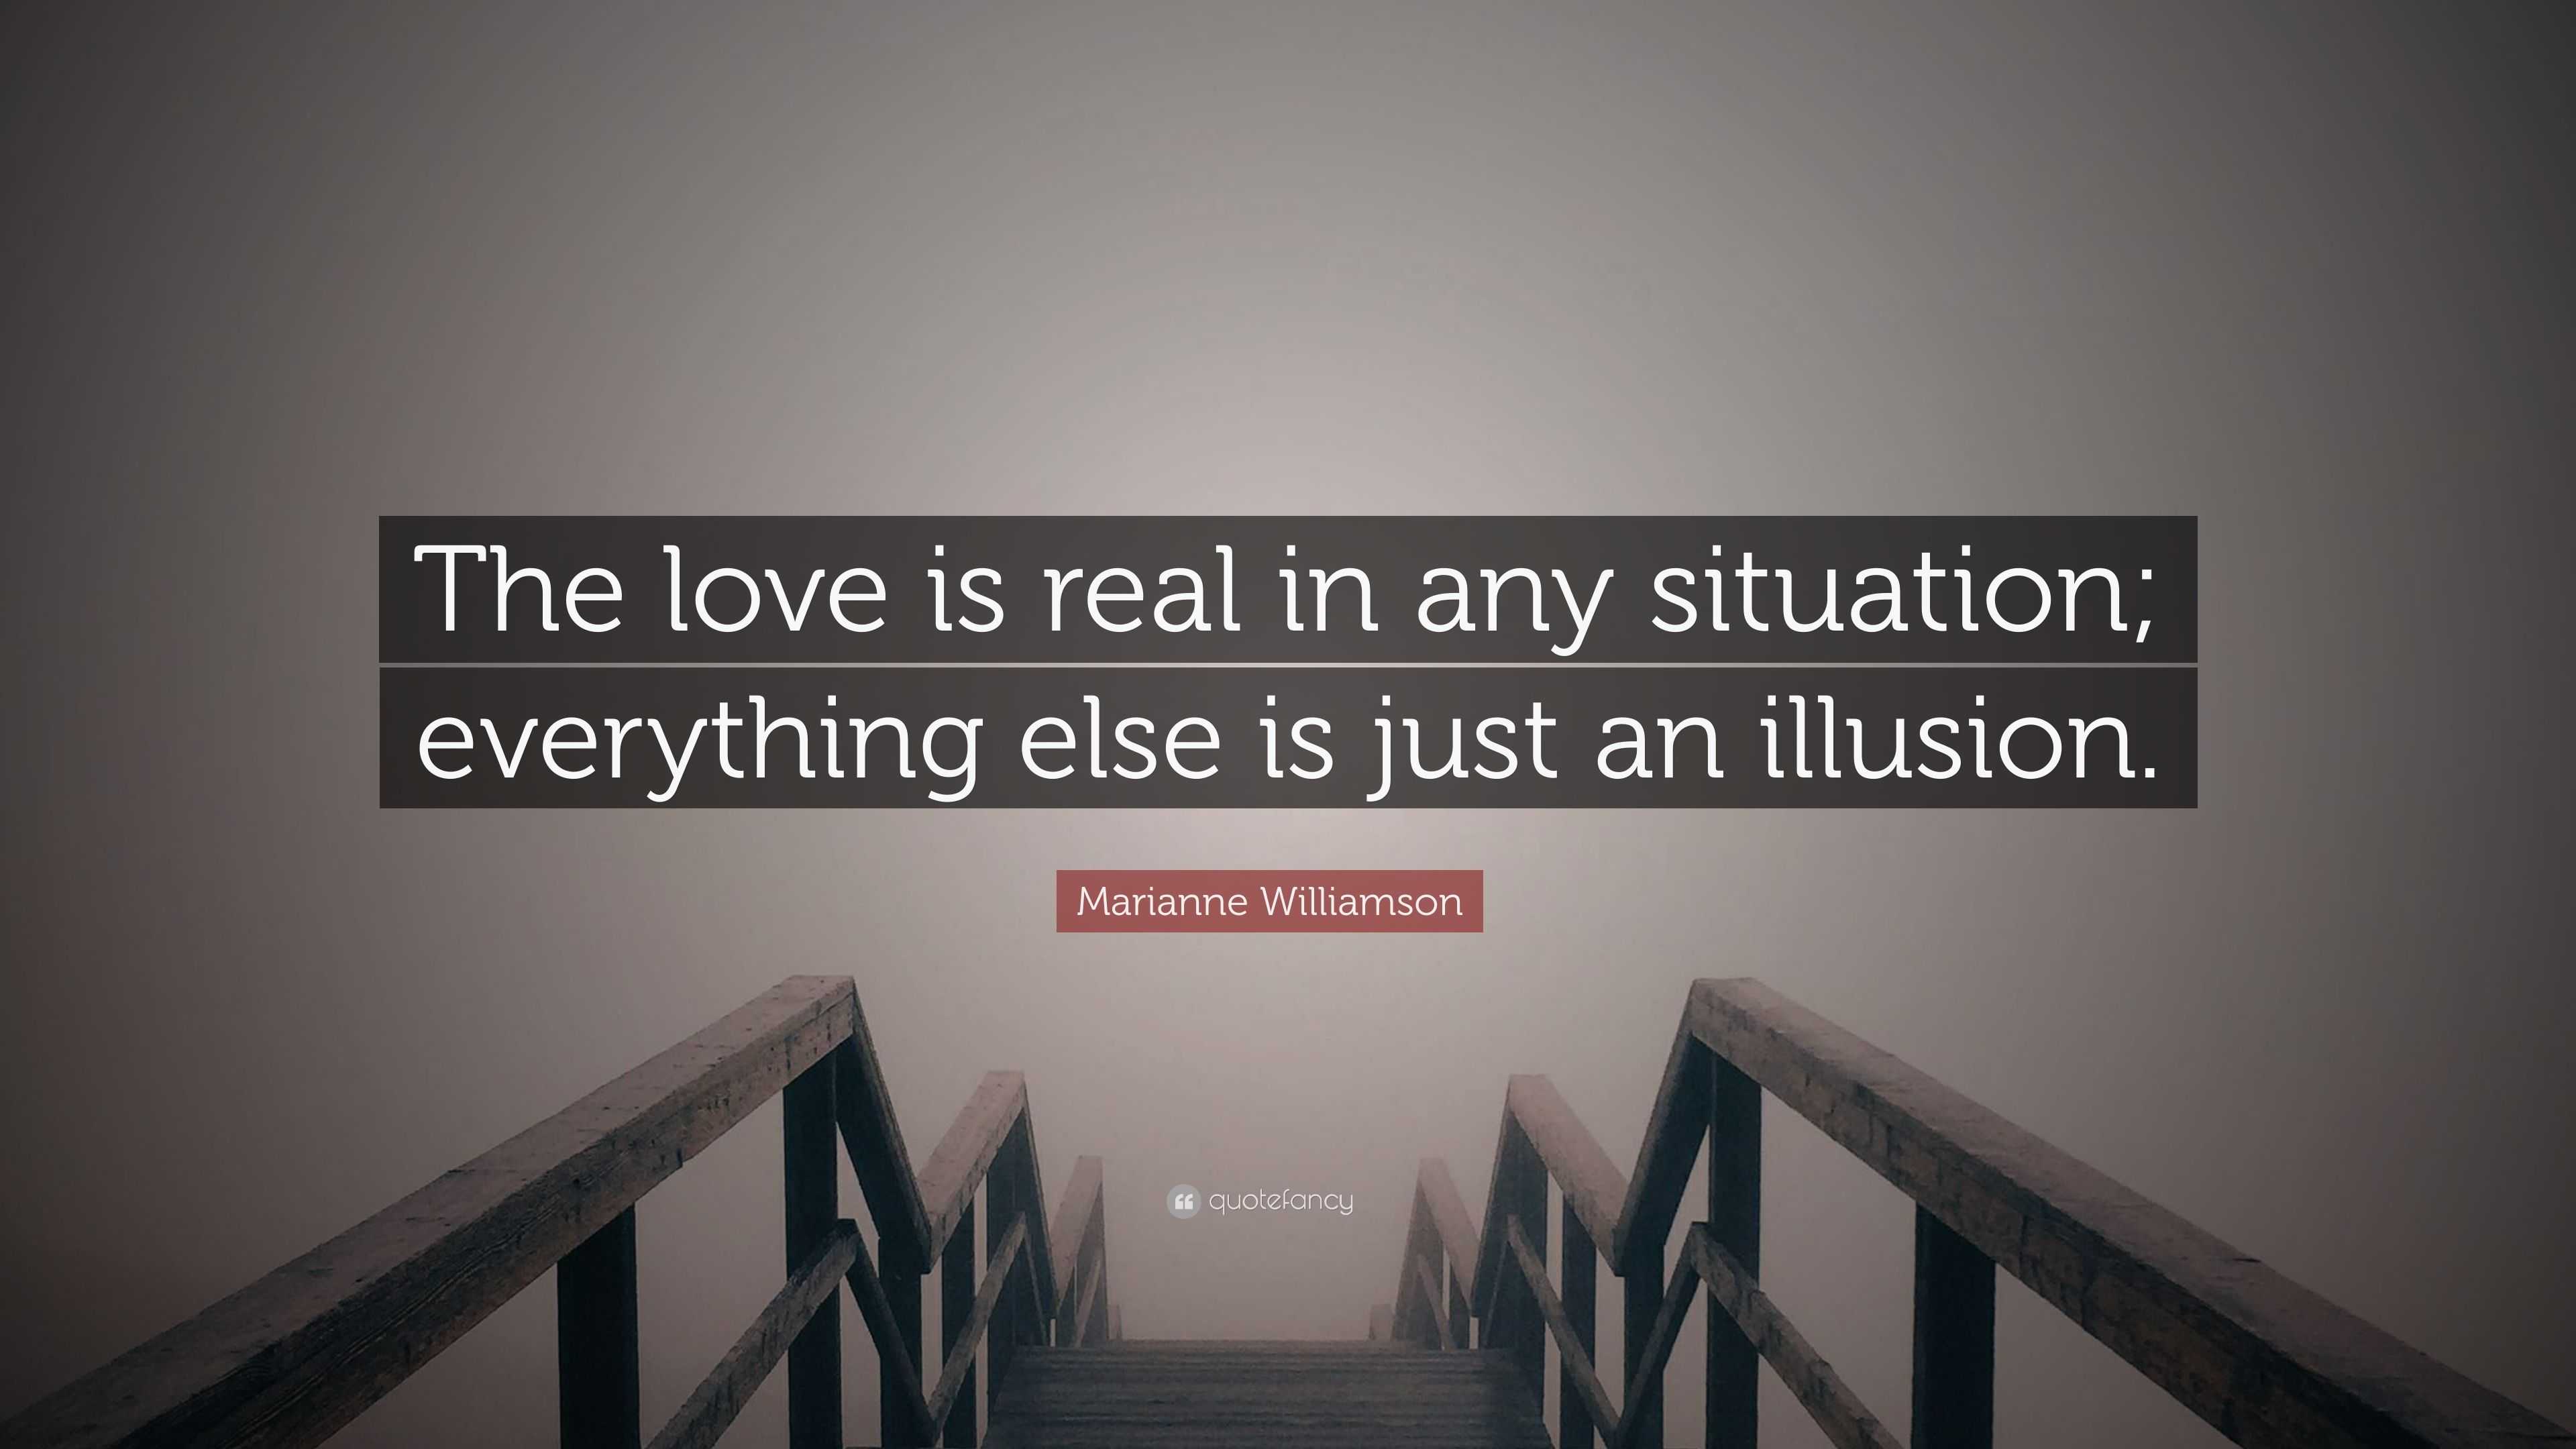 Marianne Williamson Quote: “The love is real in any situation